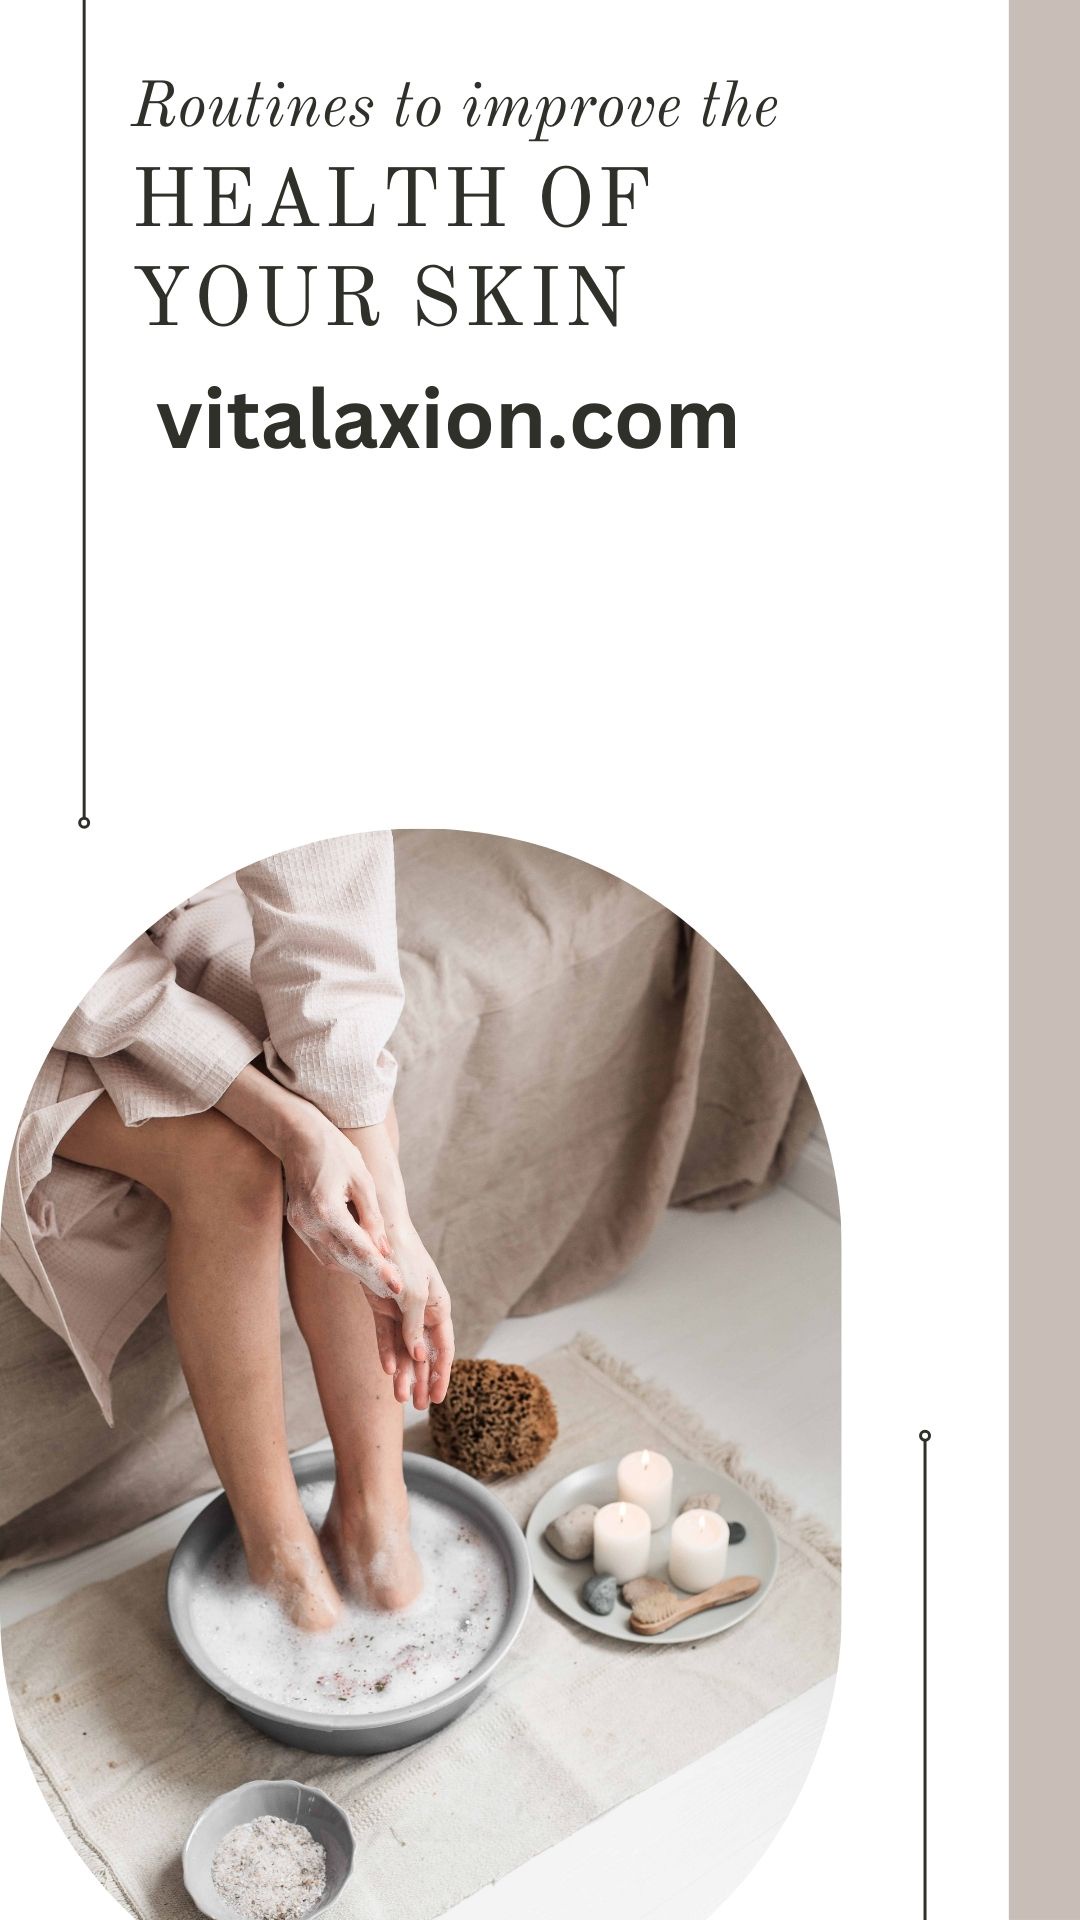 Exploring the Benefits of Ionic Footbath with Vitalaxion A Holistic Approach to Detoxification